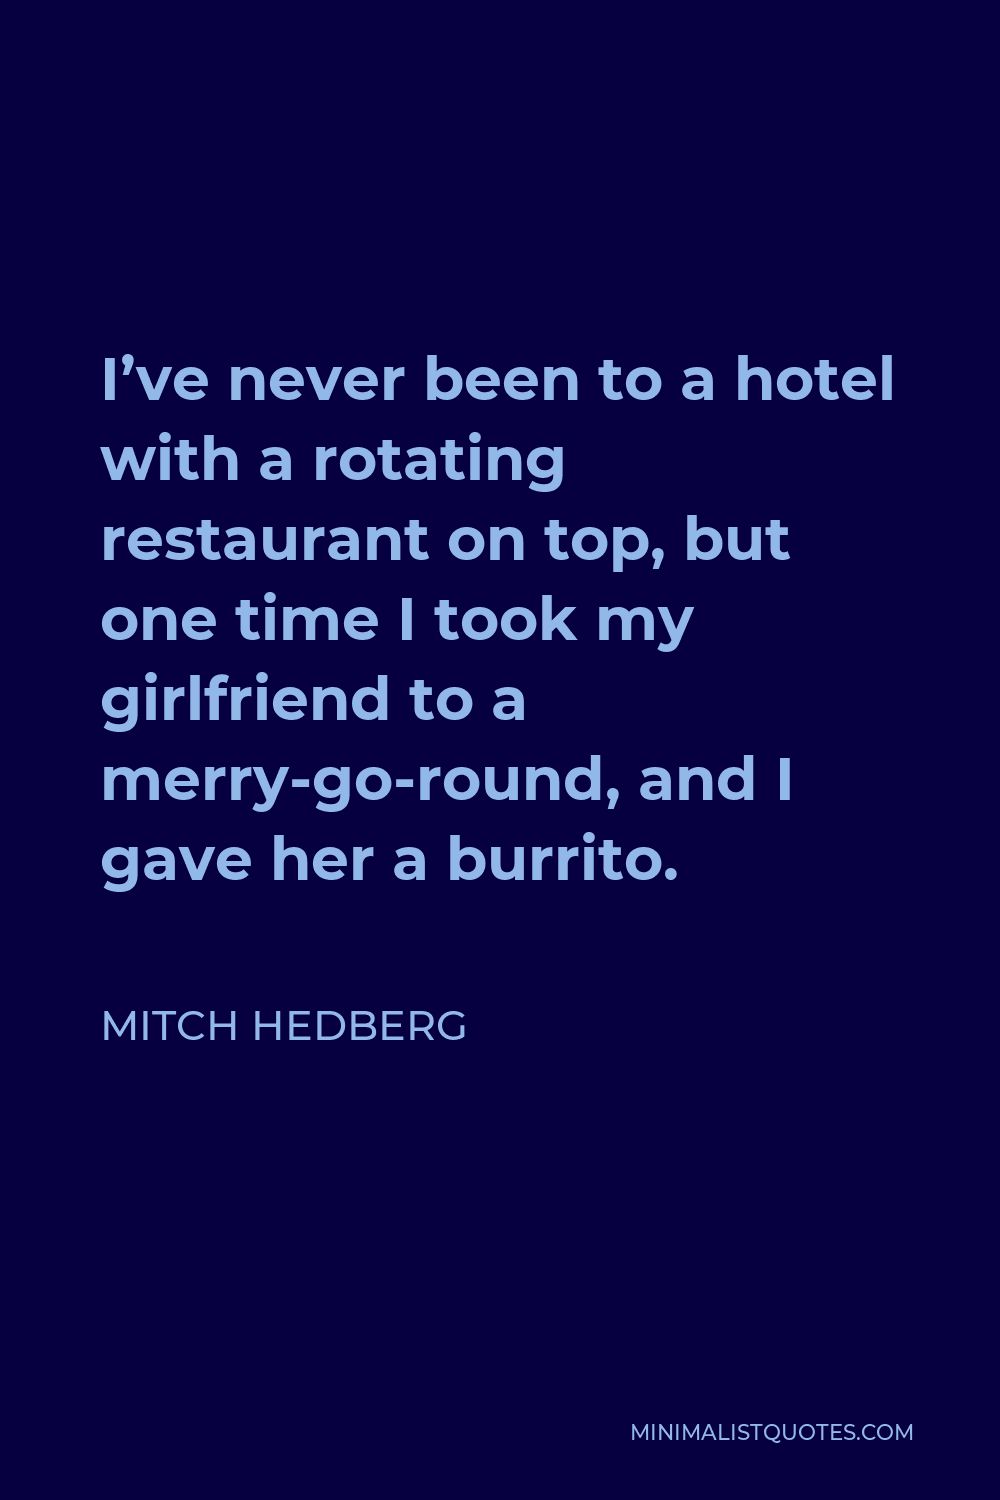 Mitch Hedberg Quote - I’ve never been to a hotel with a rotating restaurant on top, but one time I took my girlfriend to a merry-go-round, and I gave her a burrito.